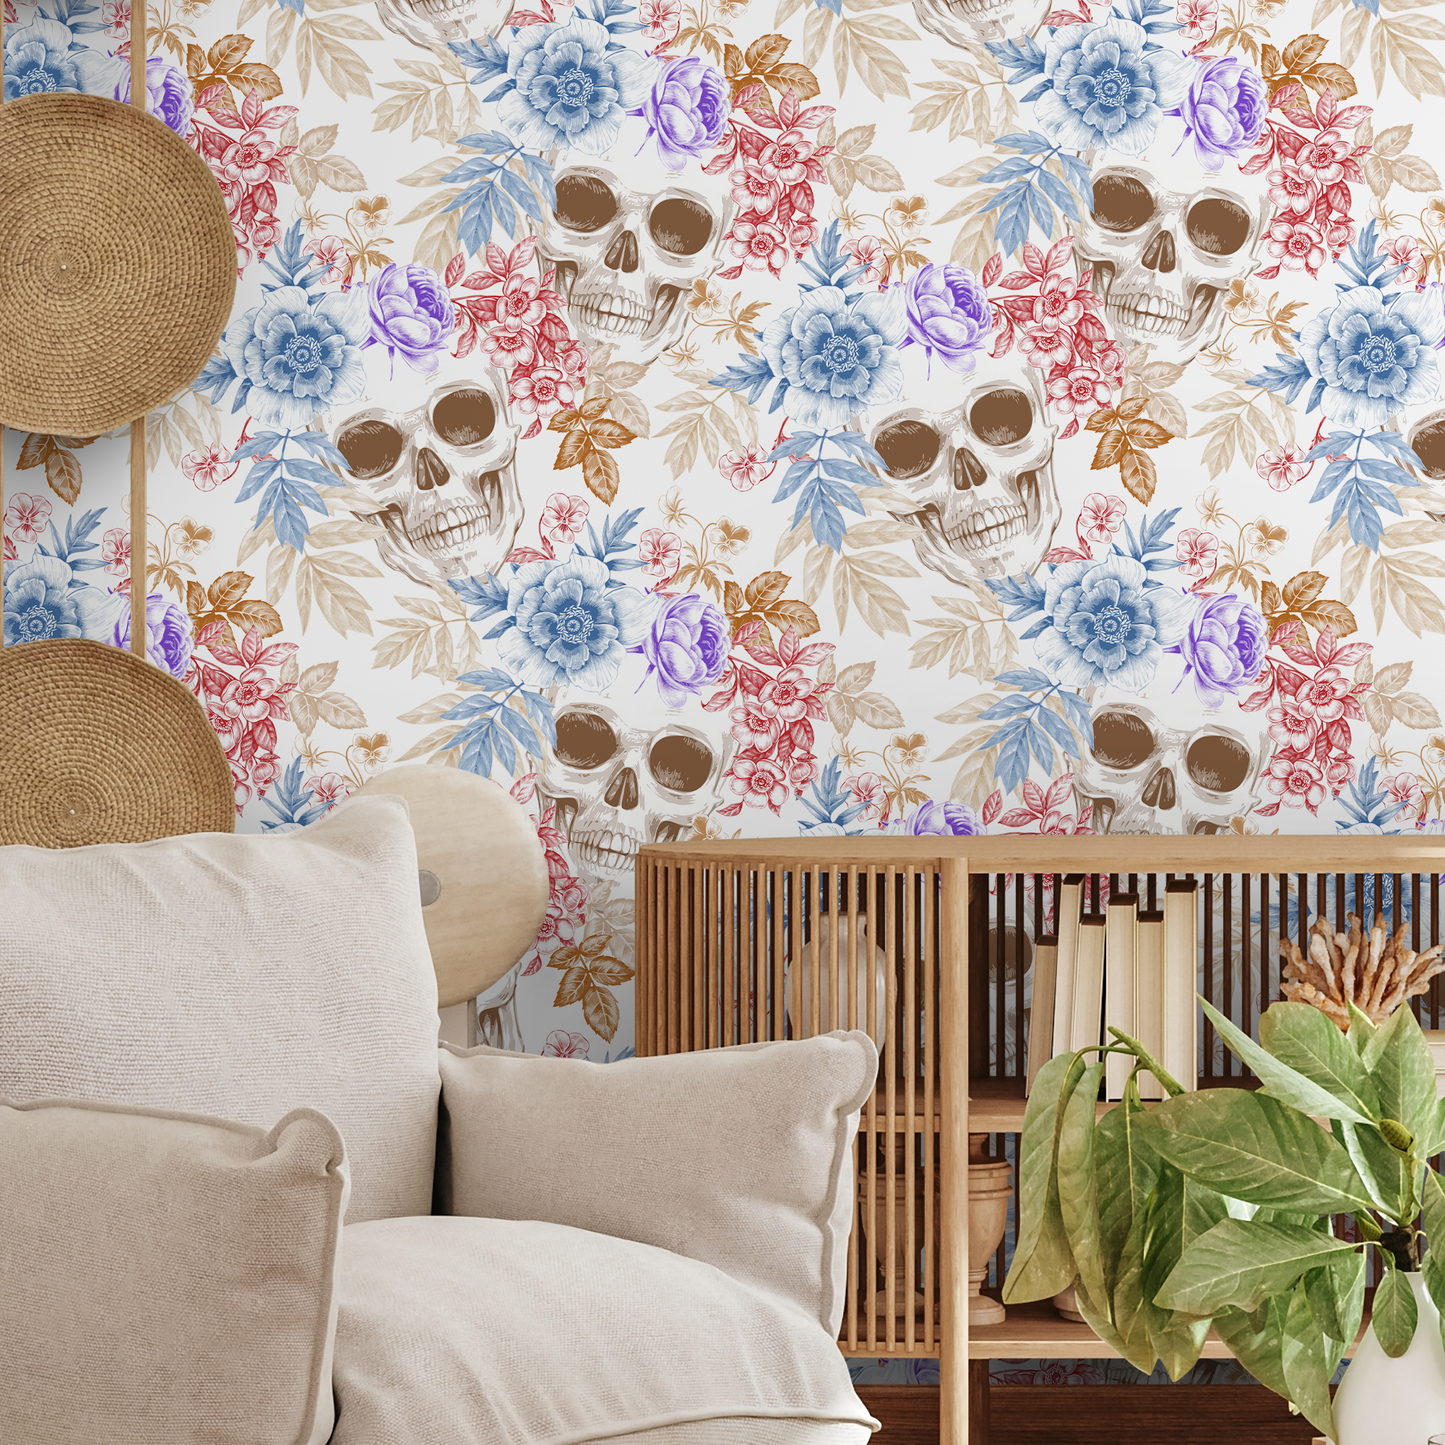 Colorful Tropical Skull Wallpaper Floral Gothic Wallpaper Peel and Stick and Traditional Wallpaper - A364